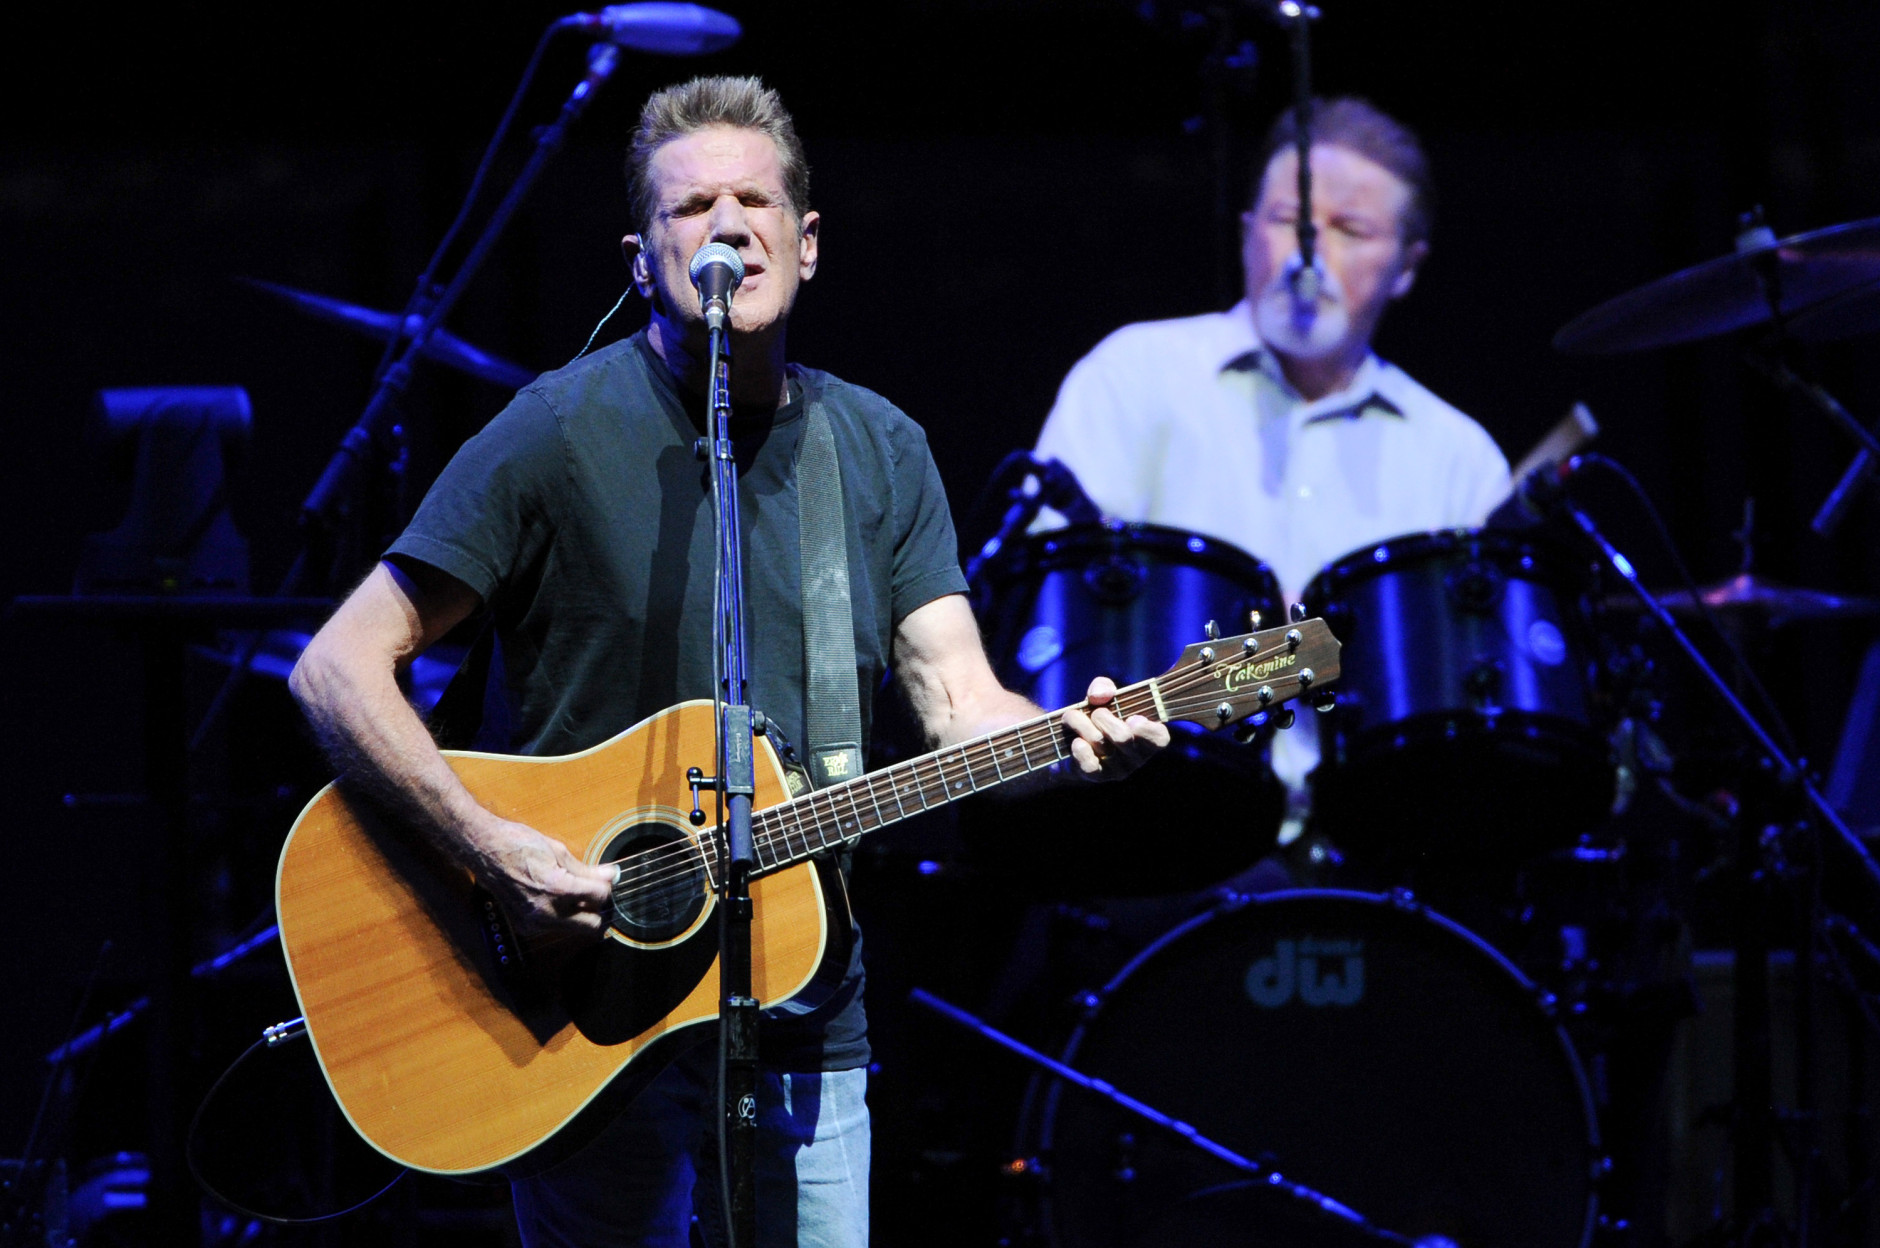 FILE - In this Nov. 8, 2013, file photo, musicians Glenn Frey, left, and Don Henley, of the Eagles, perform at Madison Square Garden in New York. Frey, who co-founded the Eagles and with Henley became one of history's most successful songwriting teams with such hits as "Hotel California" and "Life in the Fast Lane," has died at age 67. He died Monday, Jan. 18, 2016, in New York. (Photo by Evan Agostini/Invision/AP, File)